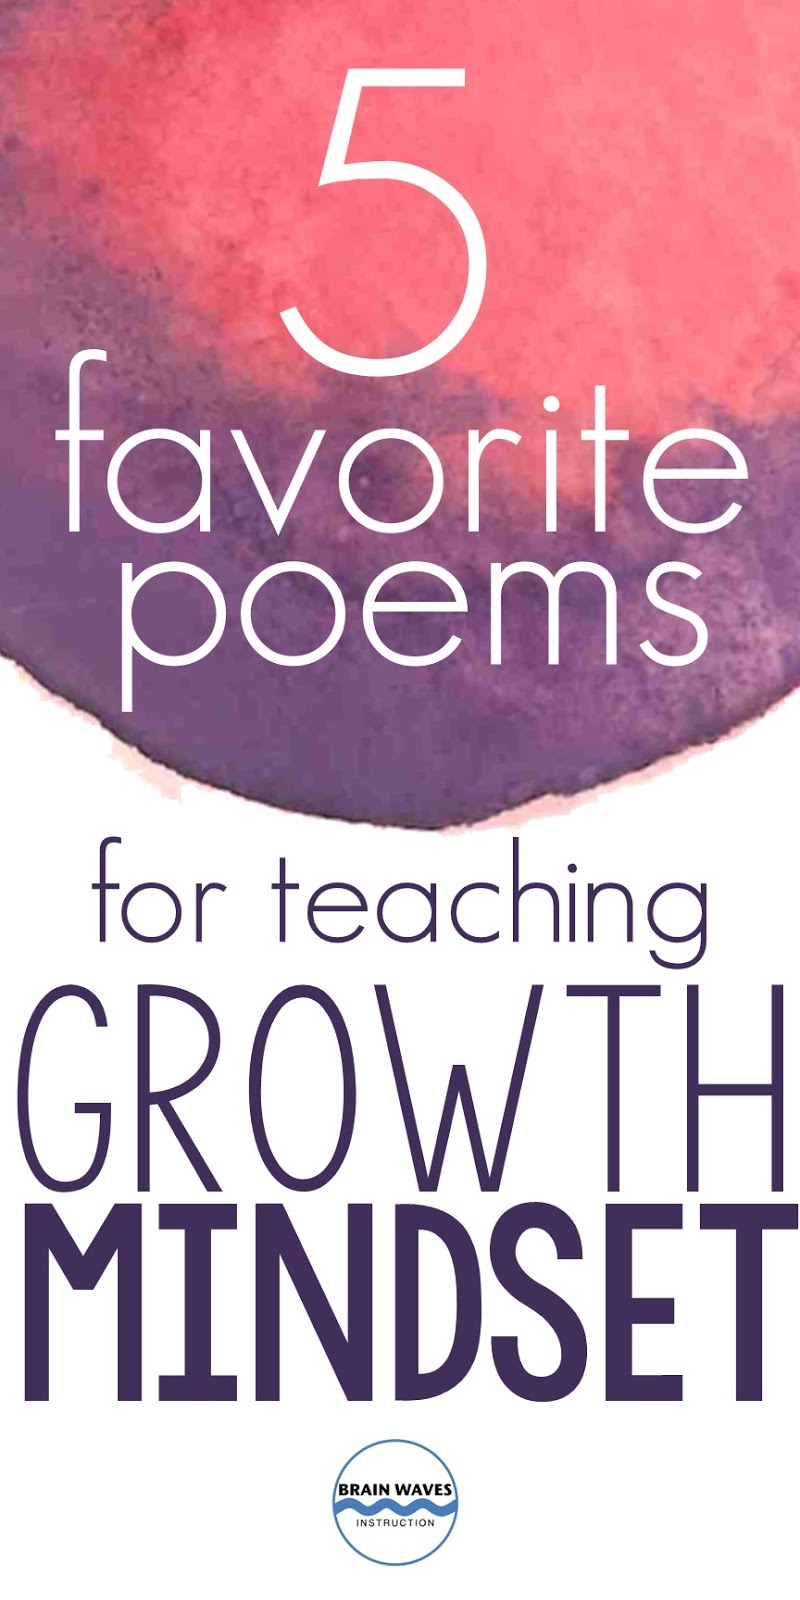 Brain Waves Instruction 5 Favorite Poems To Teach Growth Mindset